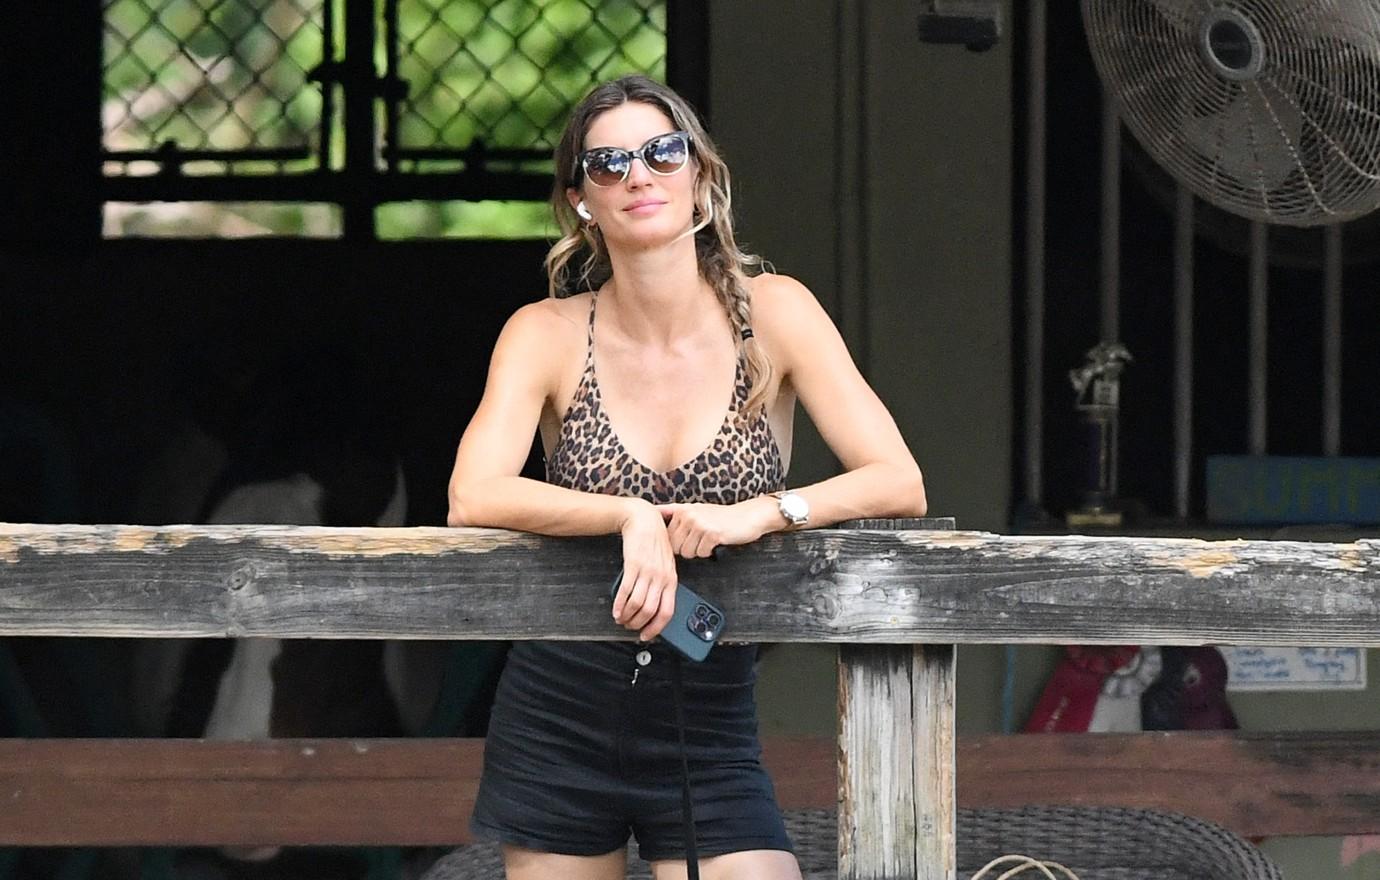 Gisele Bundchen Shows Off Killer Bikini Bod On Vacation With Daughter picture